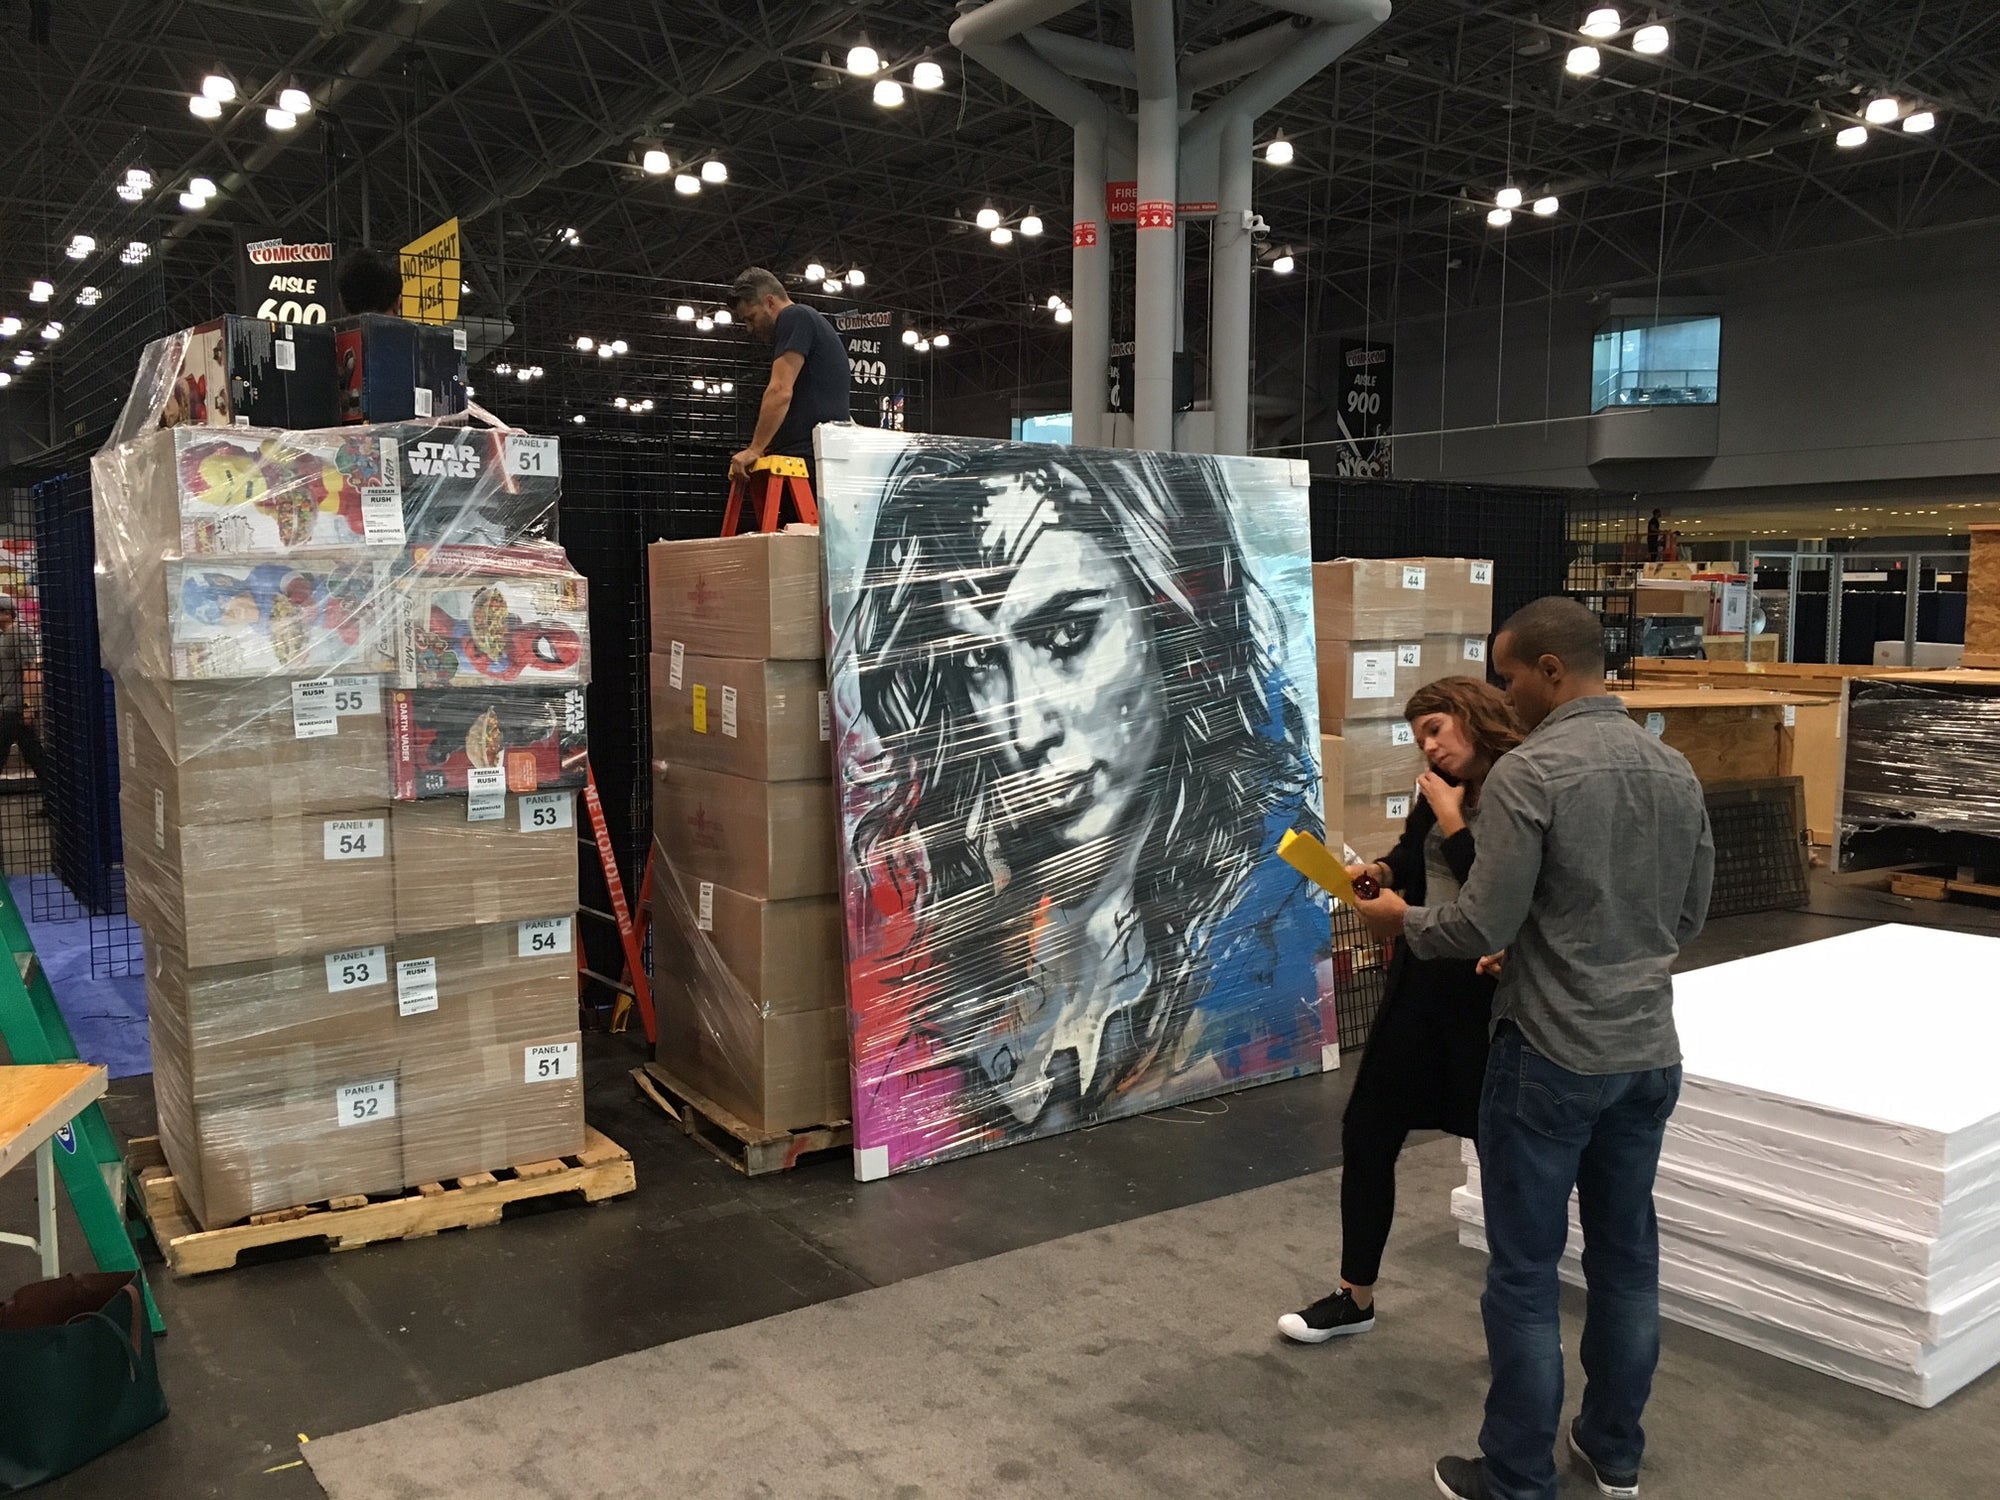 wonder woman, new york comic con, nycc, custom framing, gal gadot, Christina Angelina, Starfighter, Jacob Javits Center, lower east side, clemente building, frames and stretchers, art delivery van